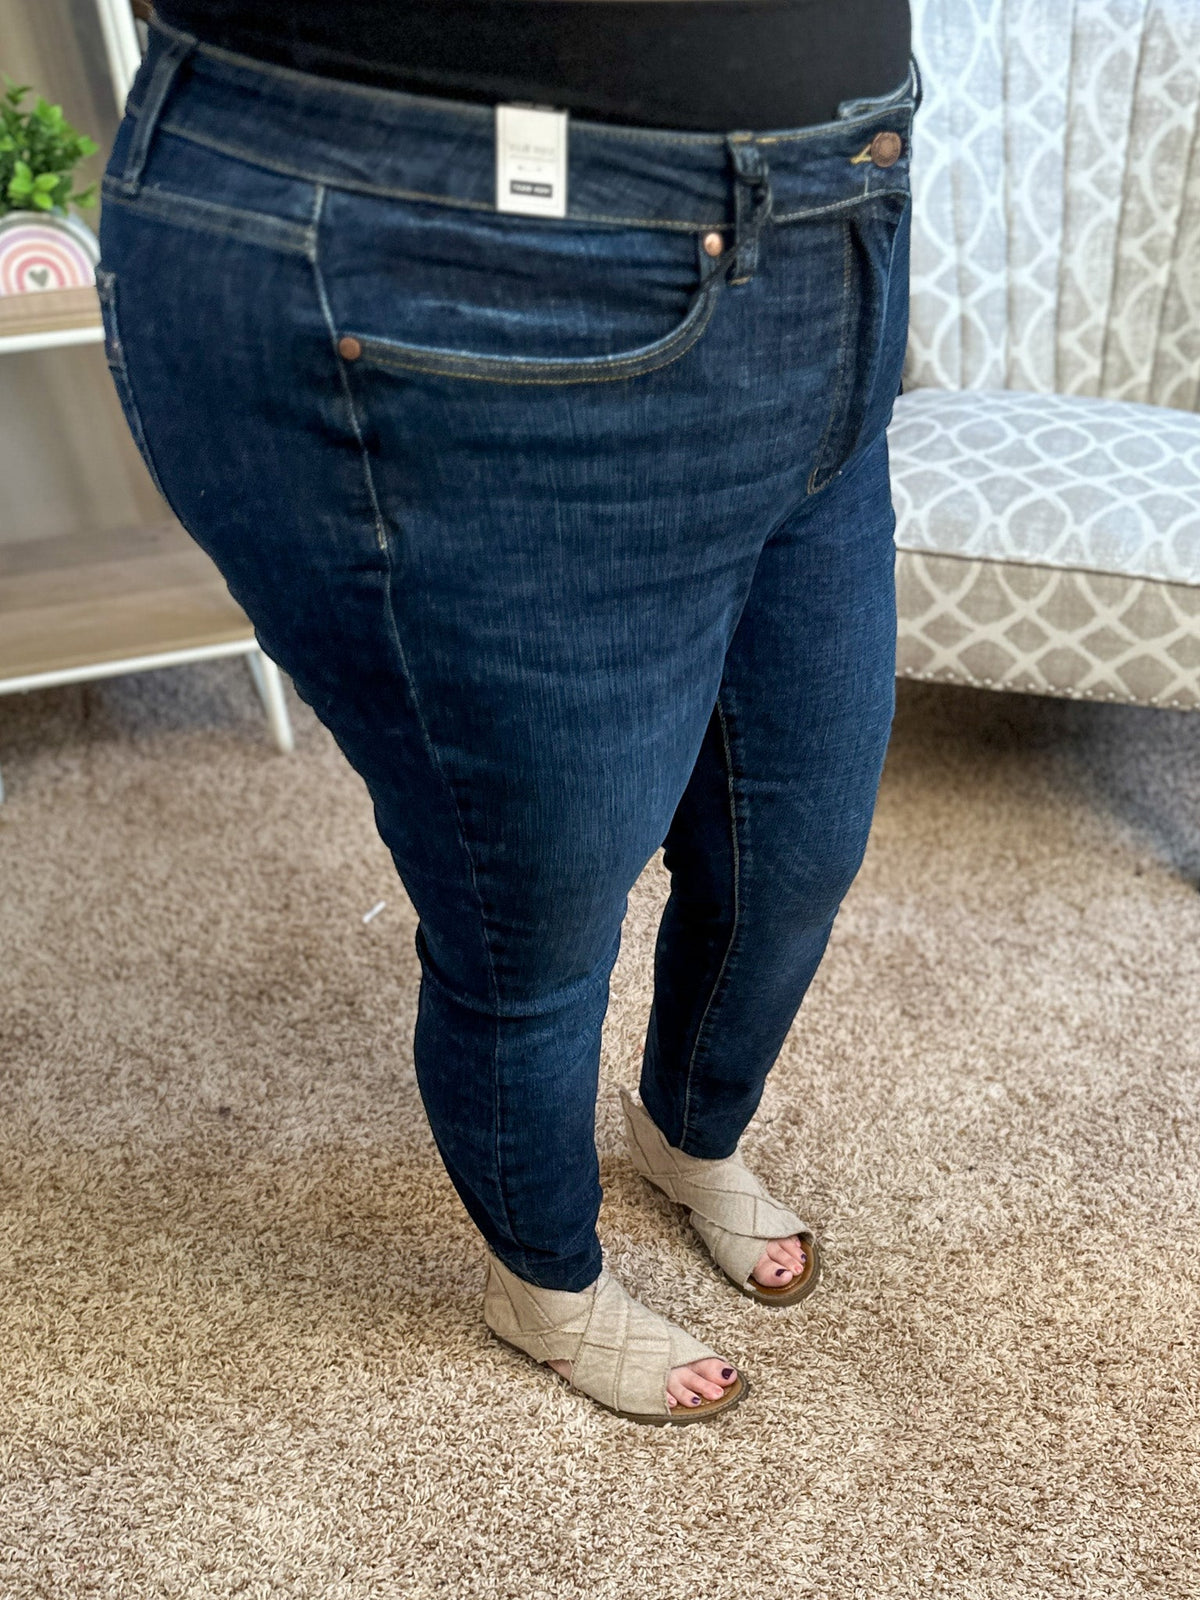 Watch Me Leave Tummy Control Judy Blue Jeans - Restocked!